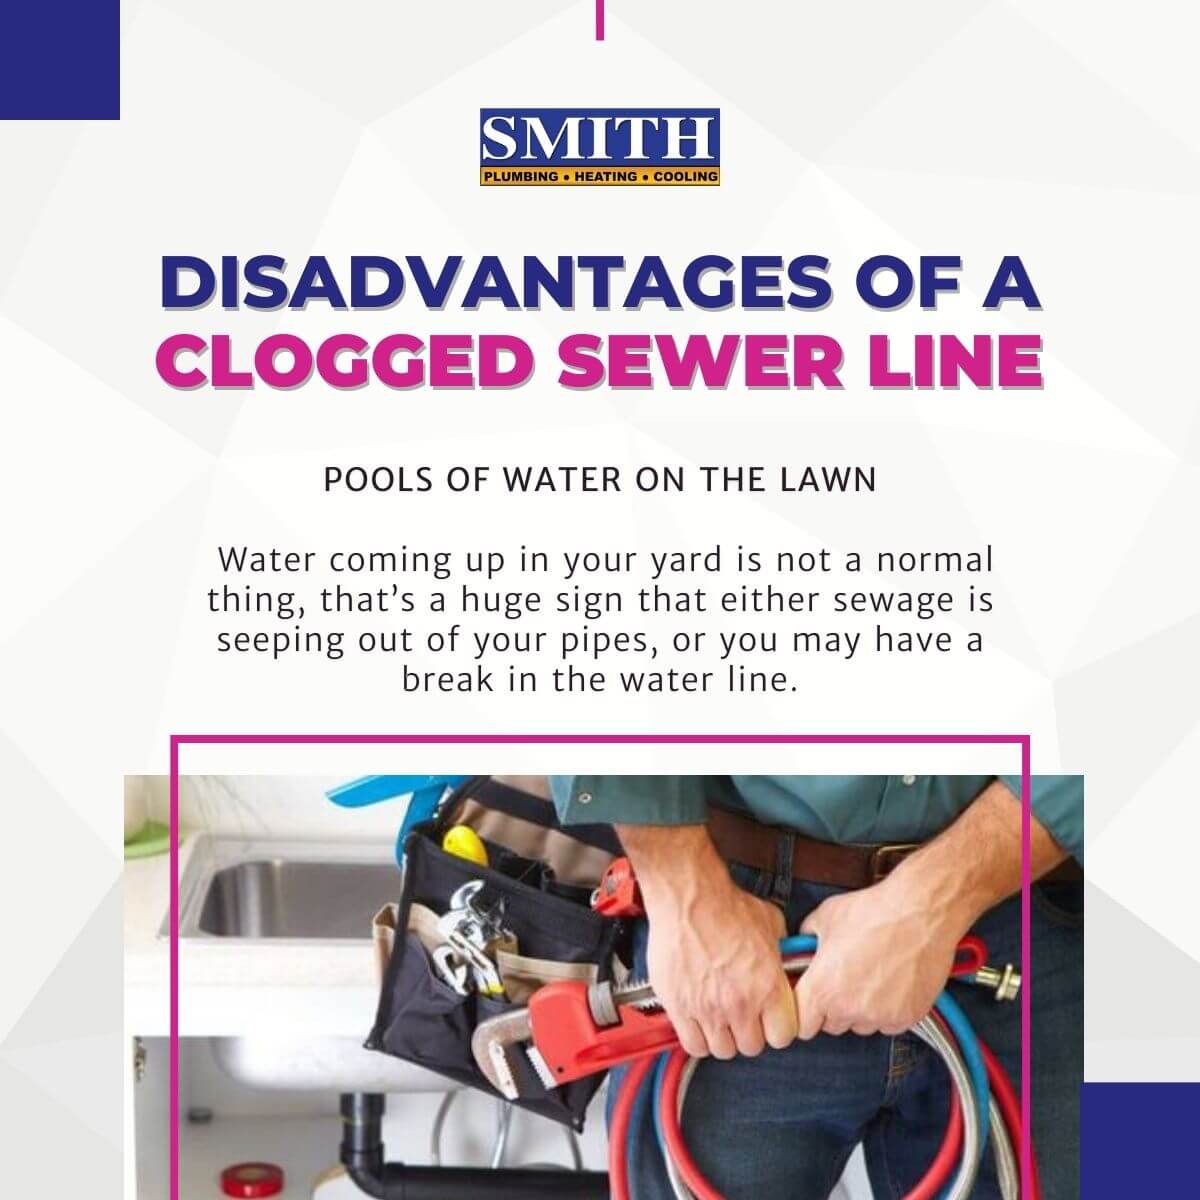 Disadvantages of a clogged sewer line page 5